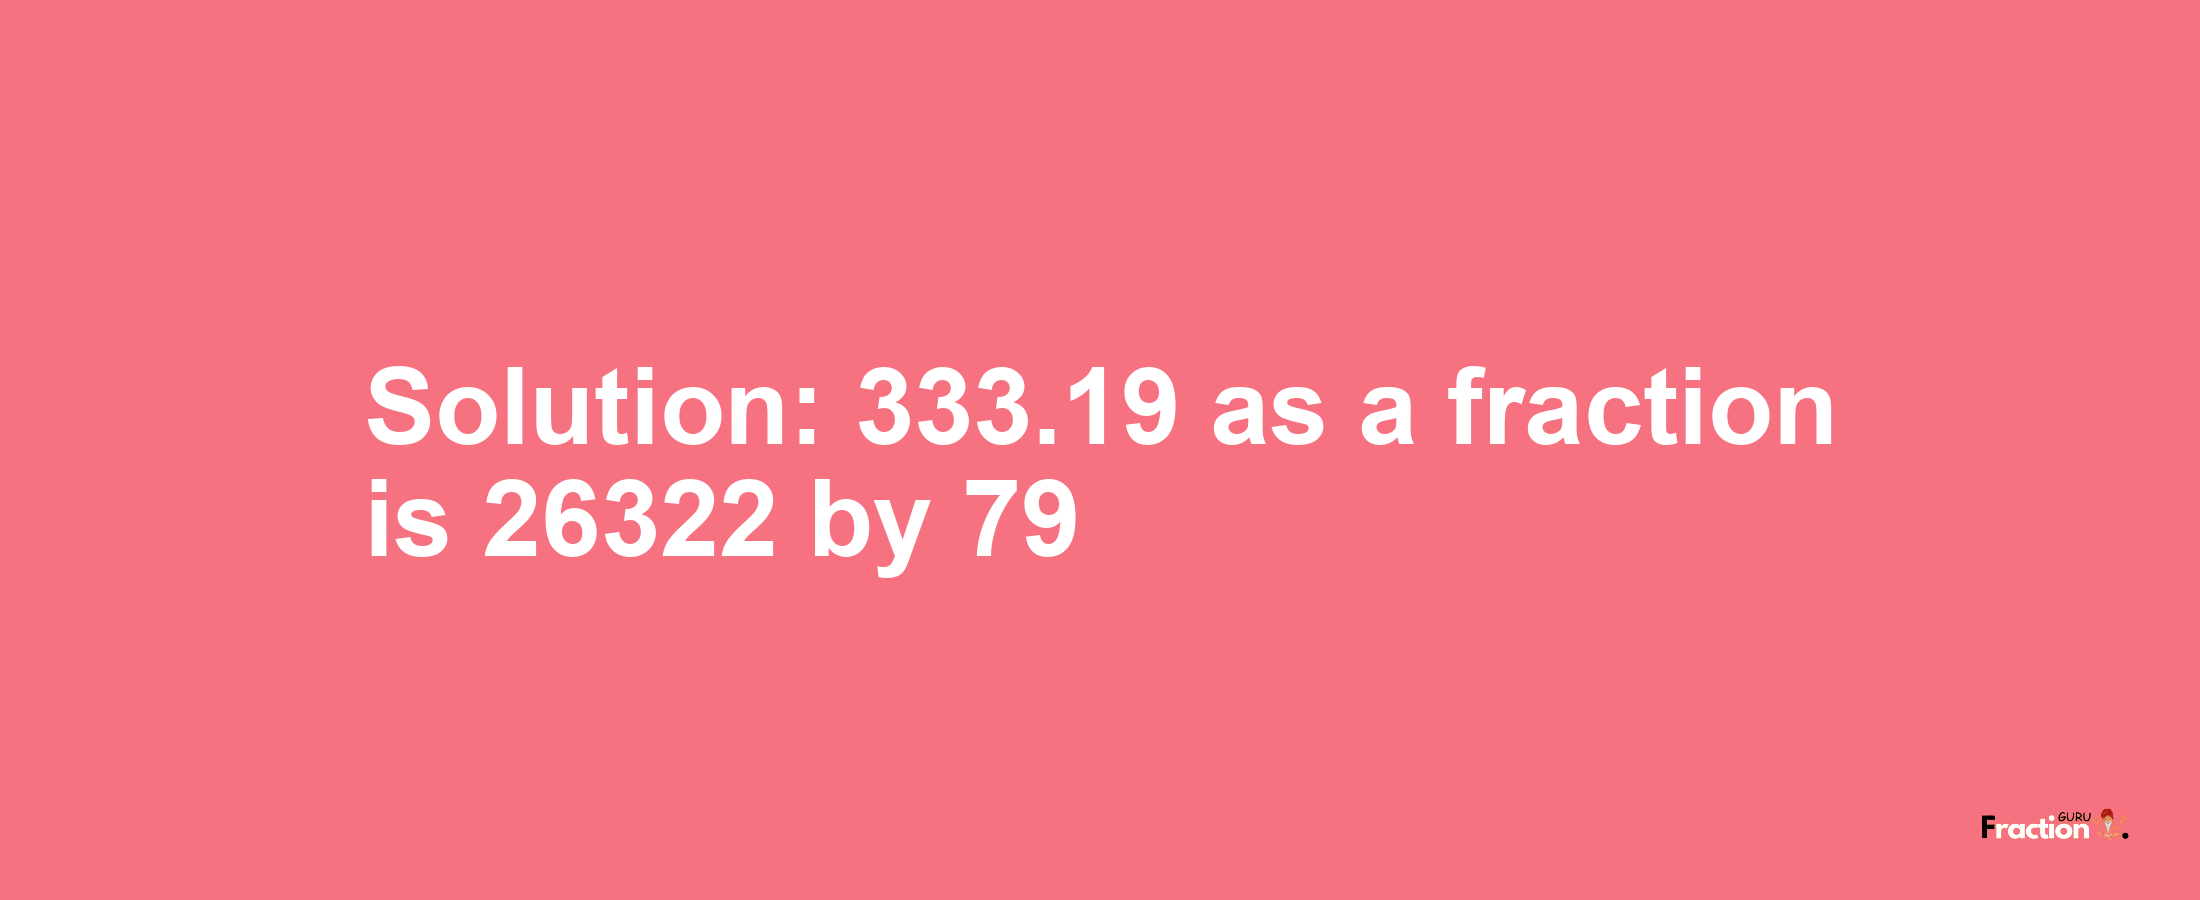 Solution:333.19 as a fraction is 26322/79